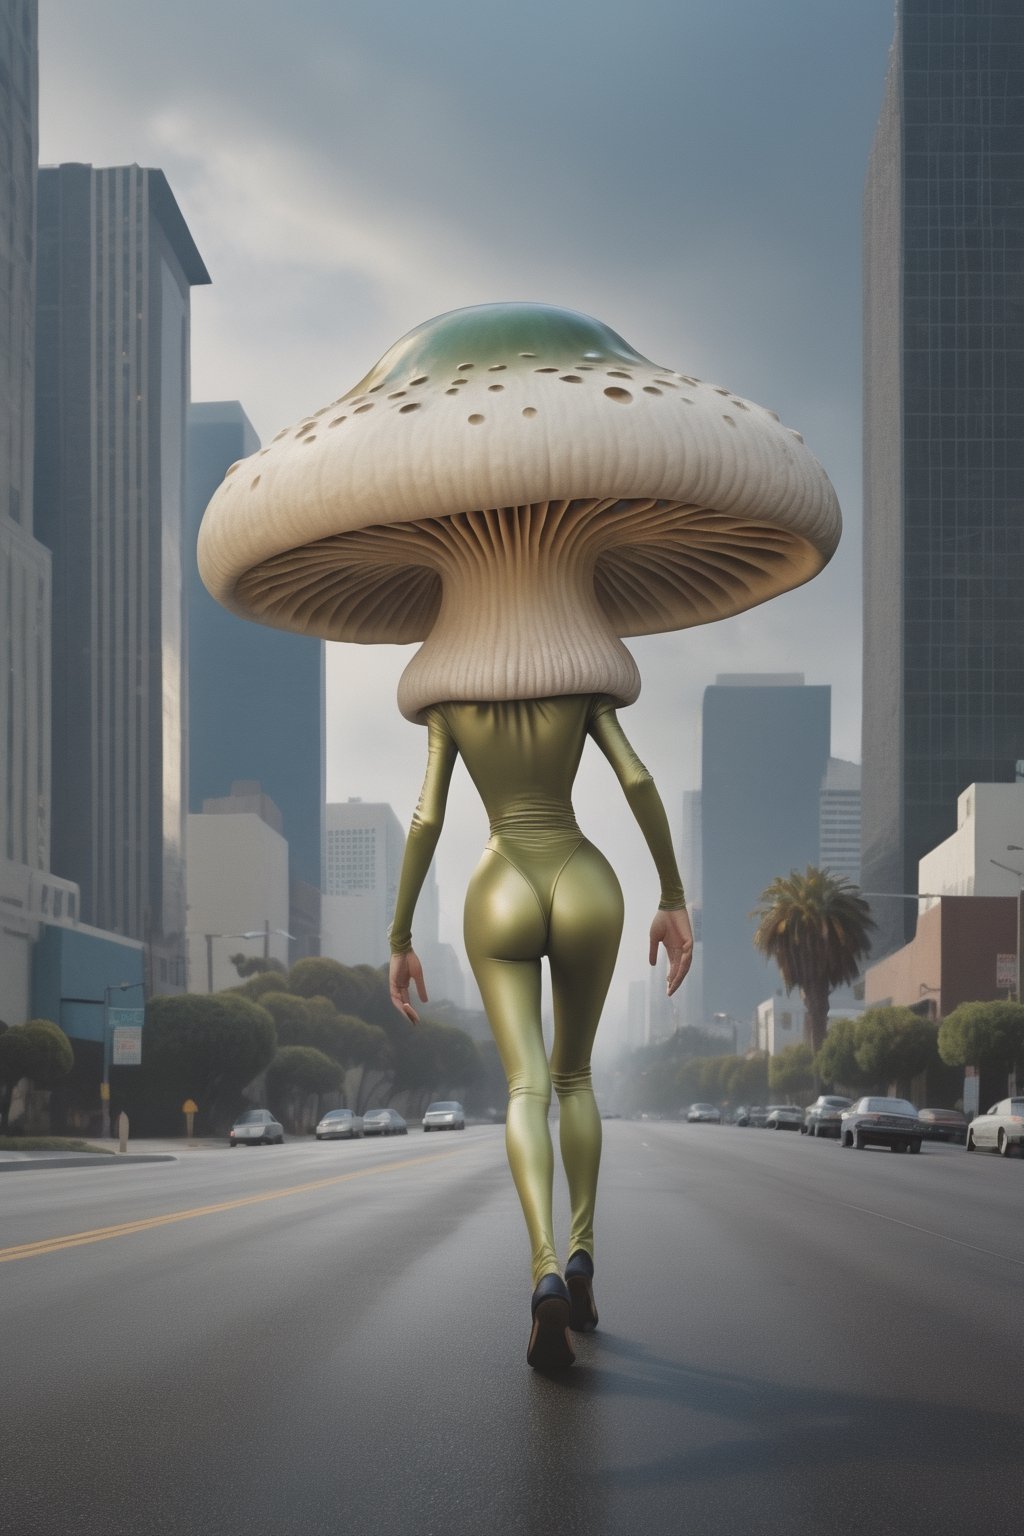 Glossy Anthropomorphic walking alien mushroom creatures, with macabre faces inspired by Alex Horley's art style, invading Earth, specifically targeting Los Angeles city, dramatic lighting, golden ratio, ultra-realistic, digital painting. 